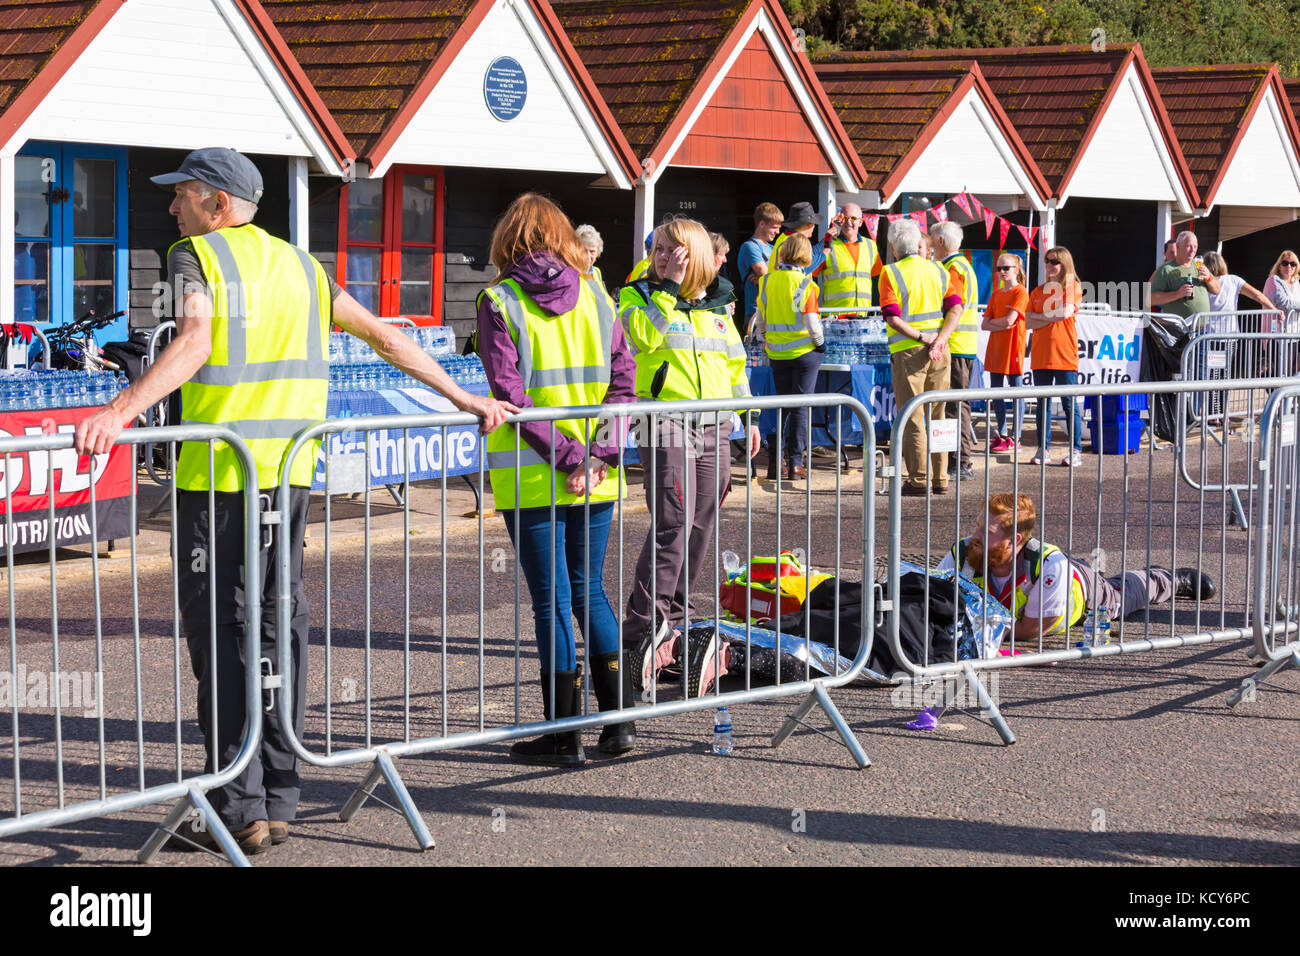 Bournemouth, Dorset, UK. 8th Oct, 2017. The final day of the Bournemouth Marathon Festival gets underway with the marathon and half marathon. Half marathon runners as the weather gets warmer and sunnier and temperatures rise. Medical attention needed for runner on the ground. Credit: Carolyn Jenkins/Alamy Live News Stock Photo